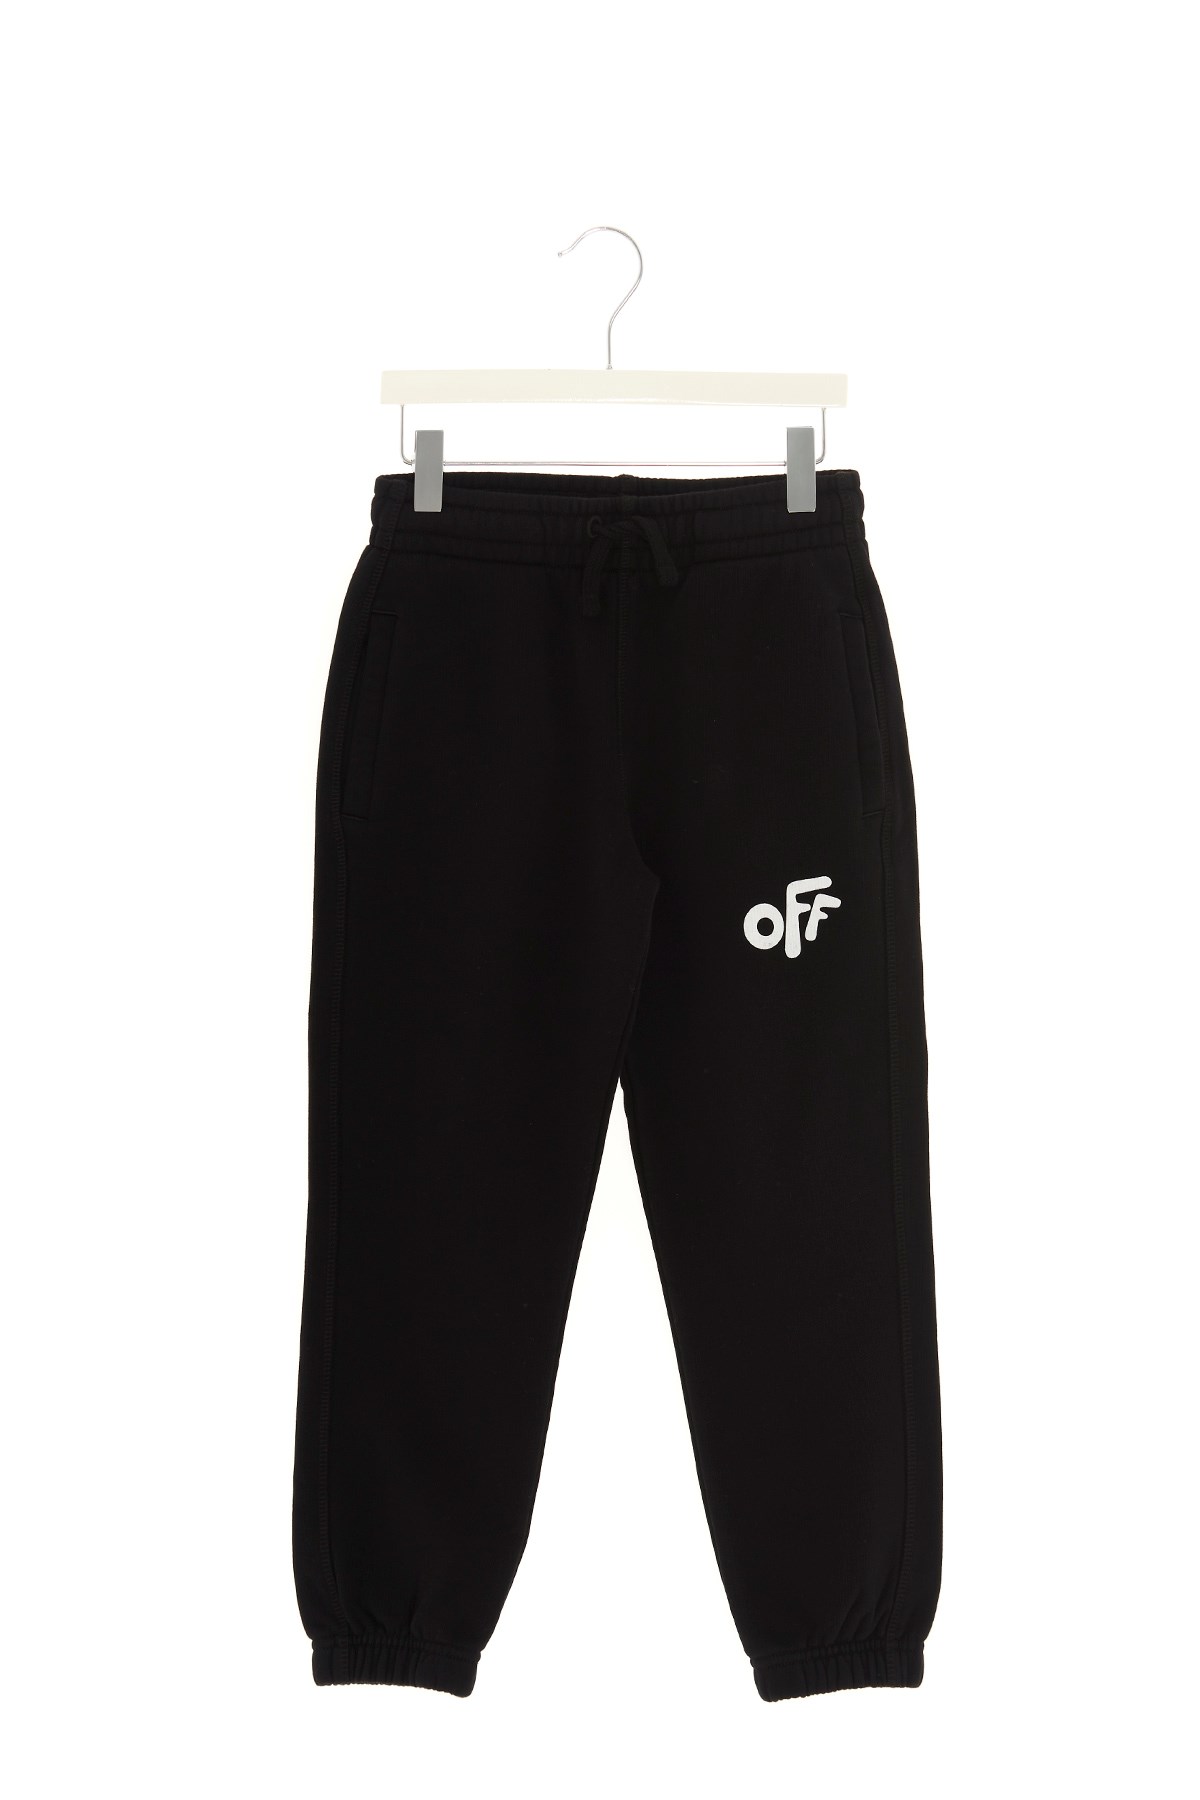 OFF-WHITE 'Off Rounded’ Joggers